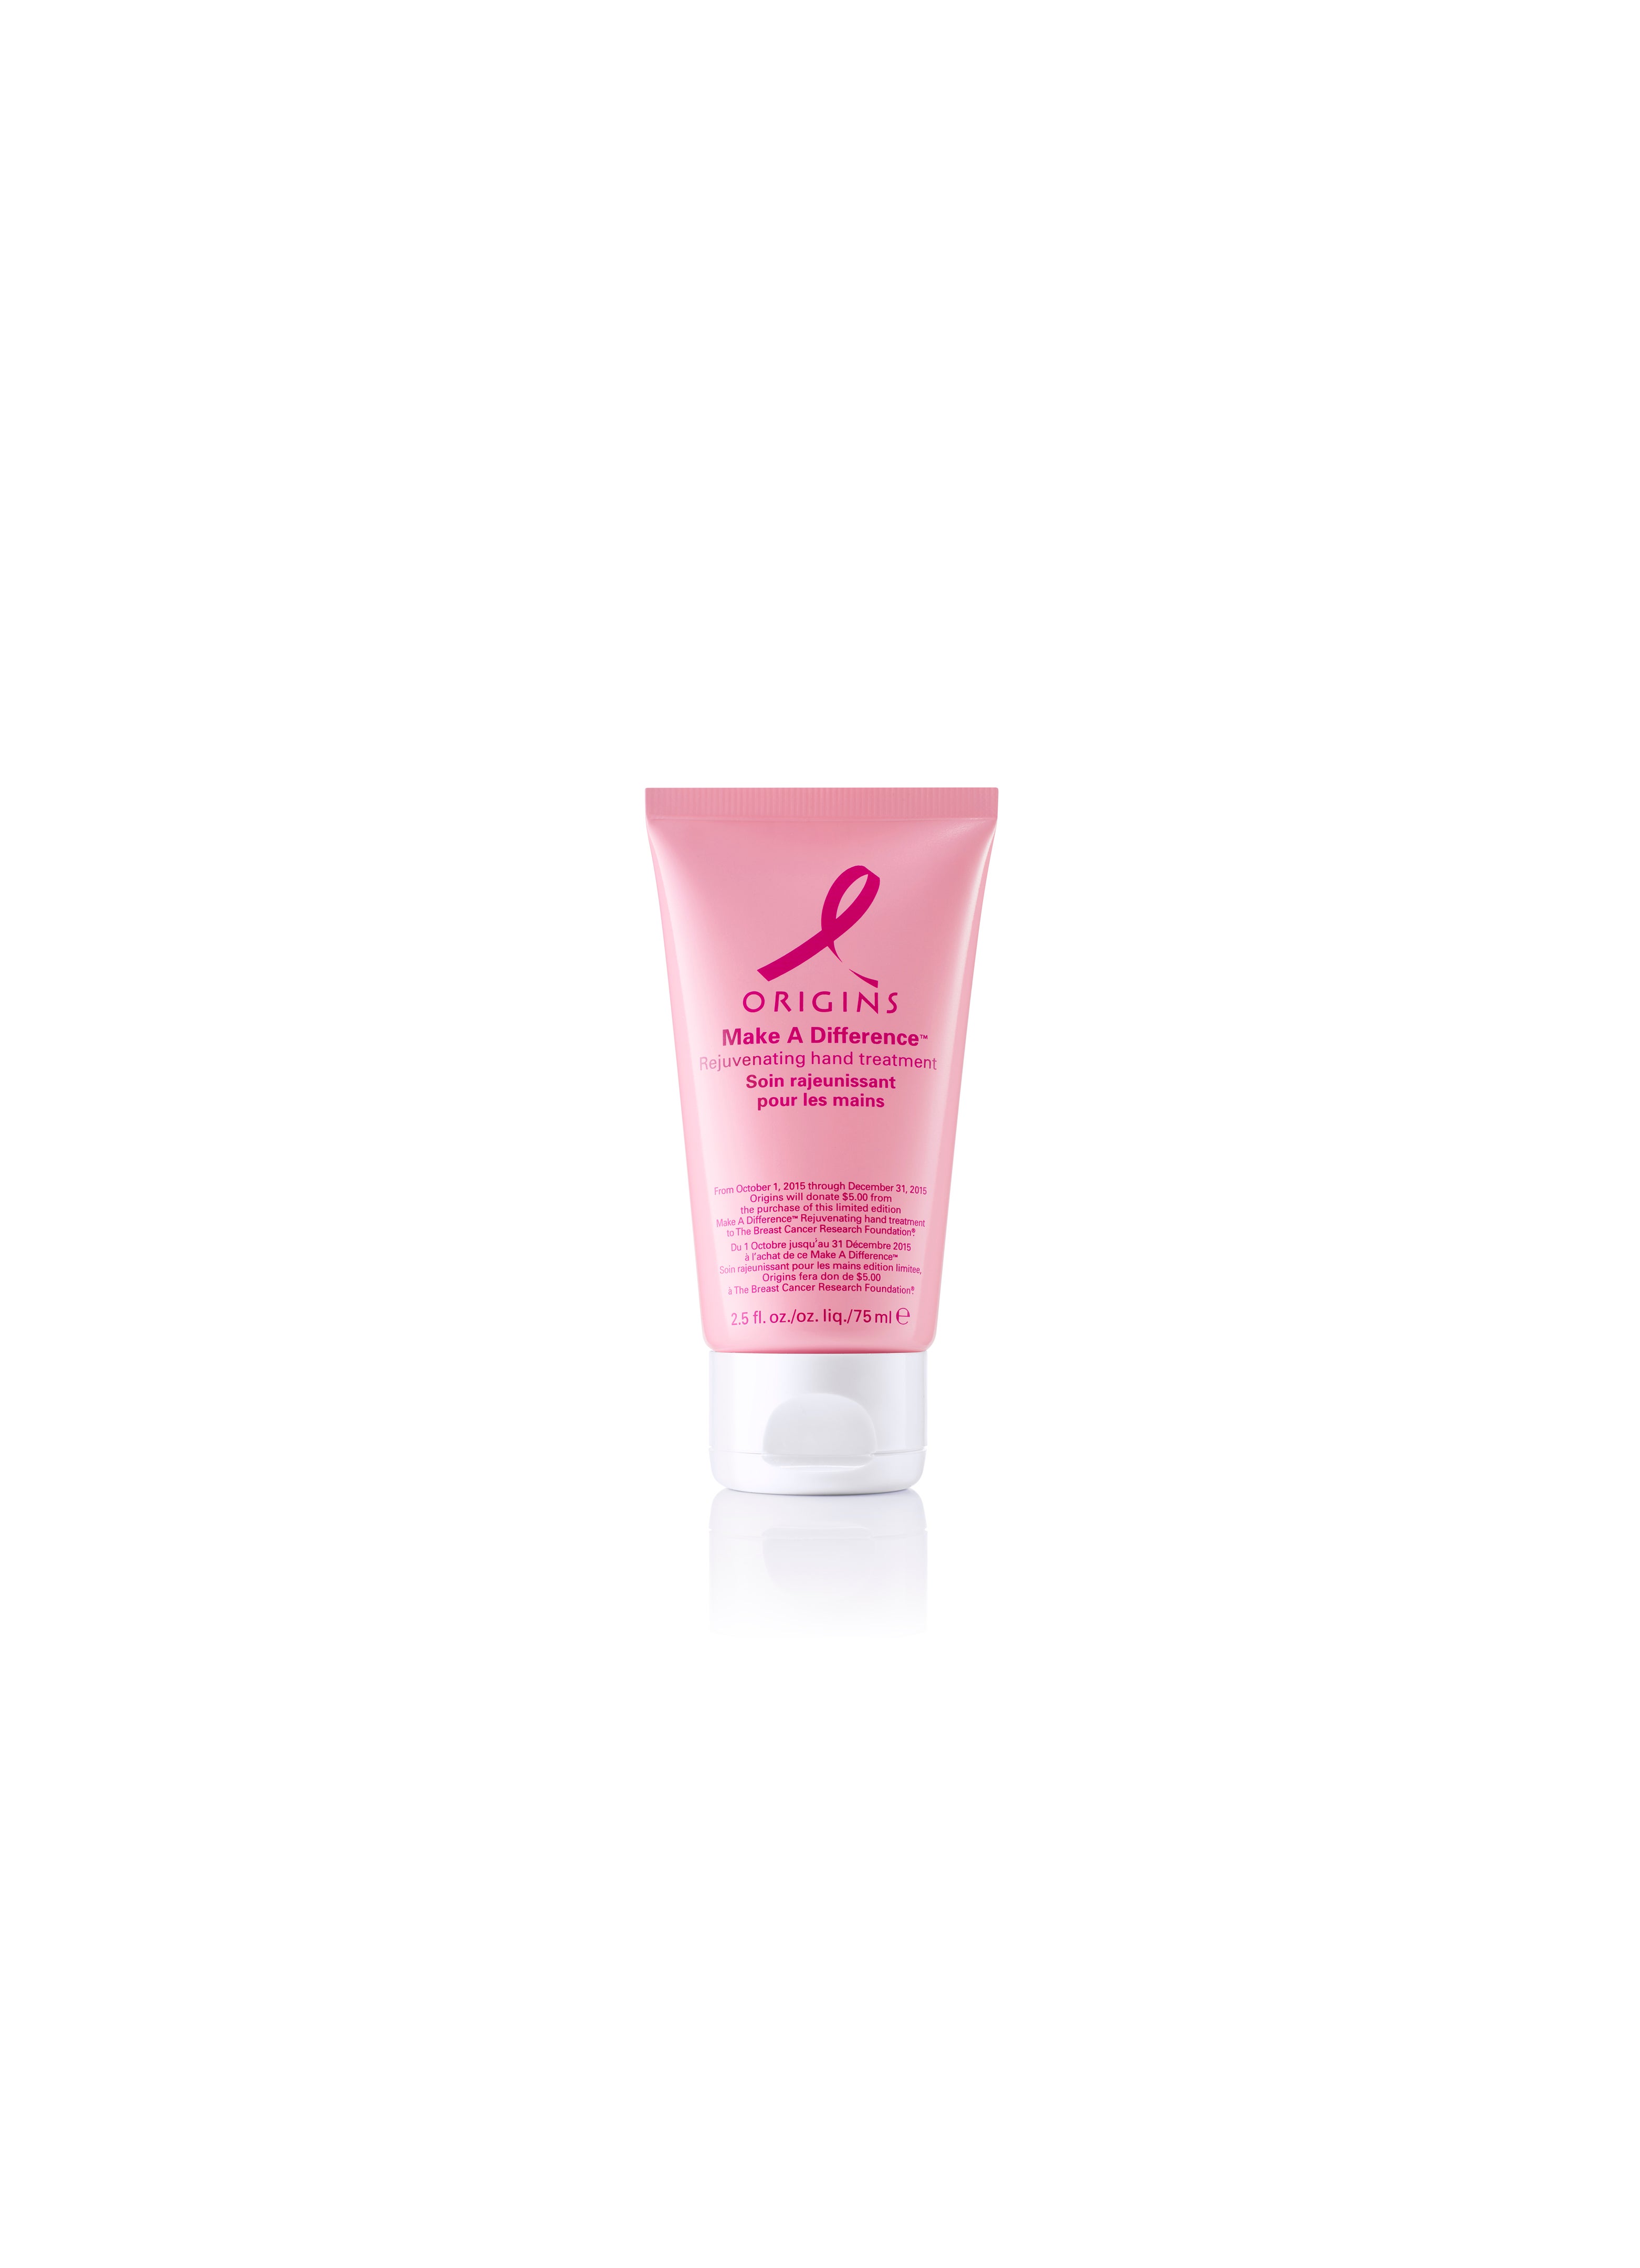 Beauty That Gives Back: BCA Must-Haves